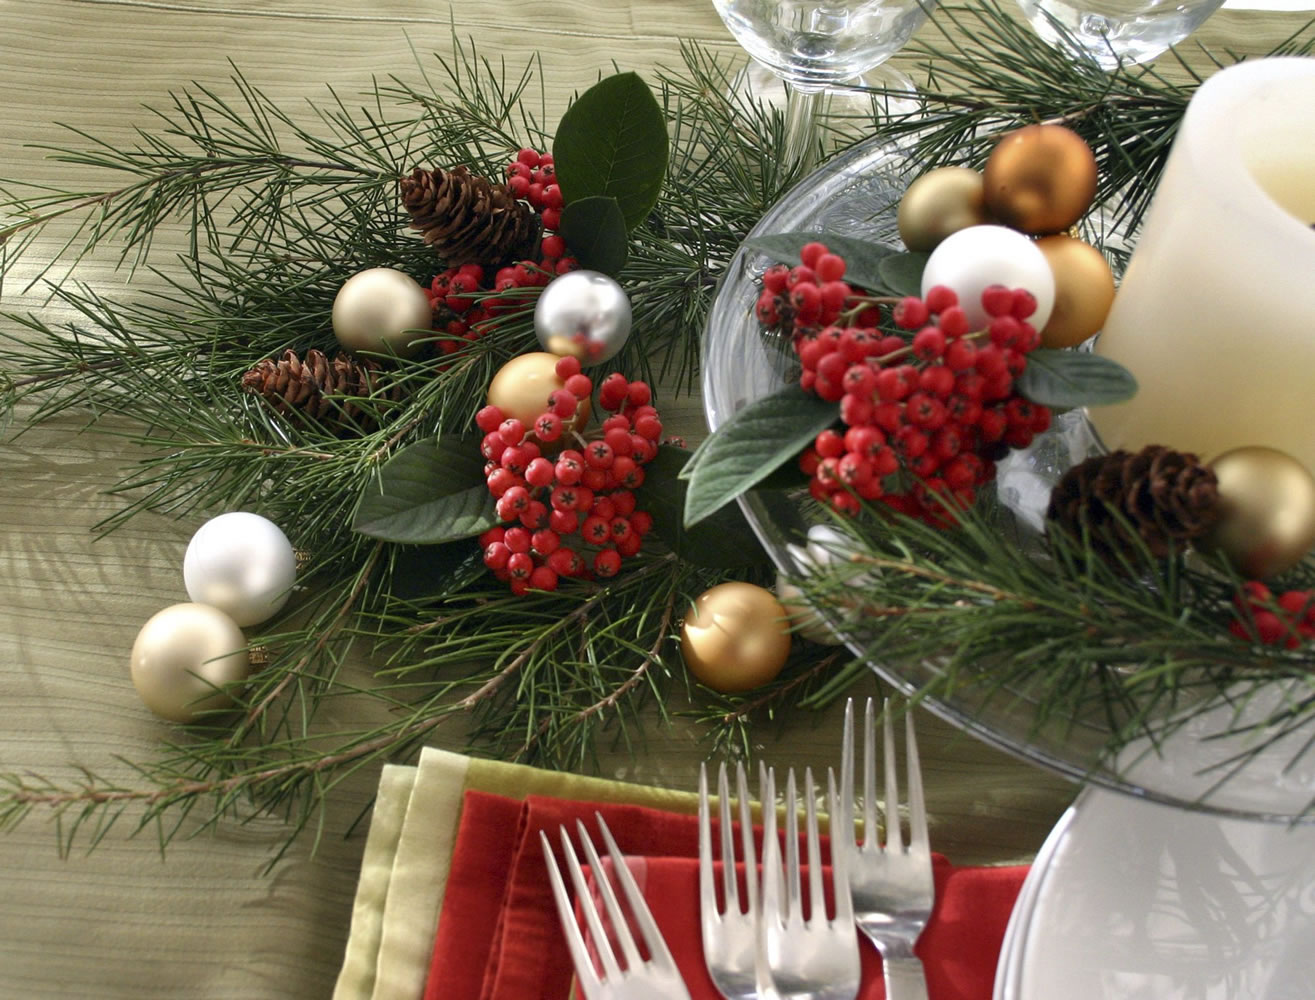 Sandy Hu/The Associated Press Even after the holidays are over, some designers say pine branches can be used in home decor all winter long, as demonstrated in this table setting styled by Zelda Gordon.